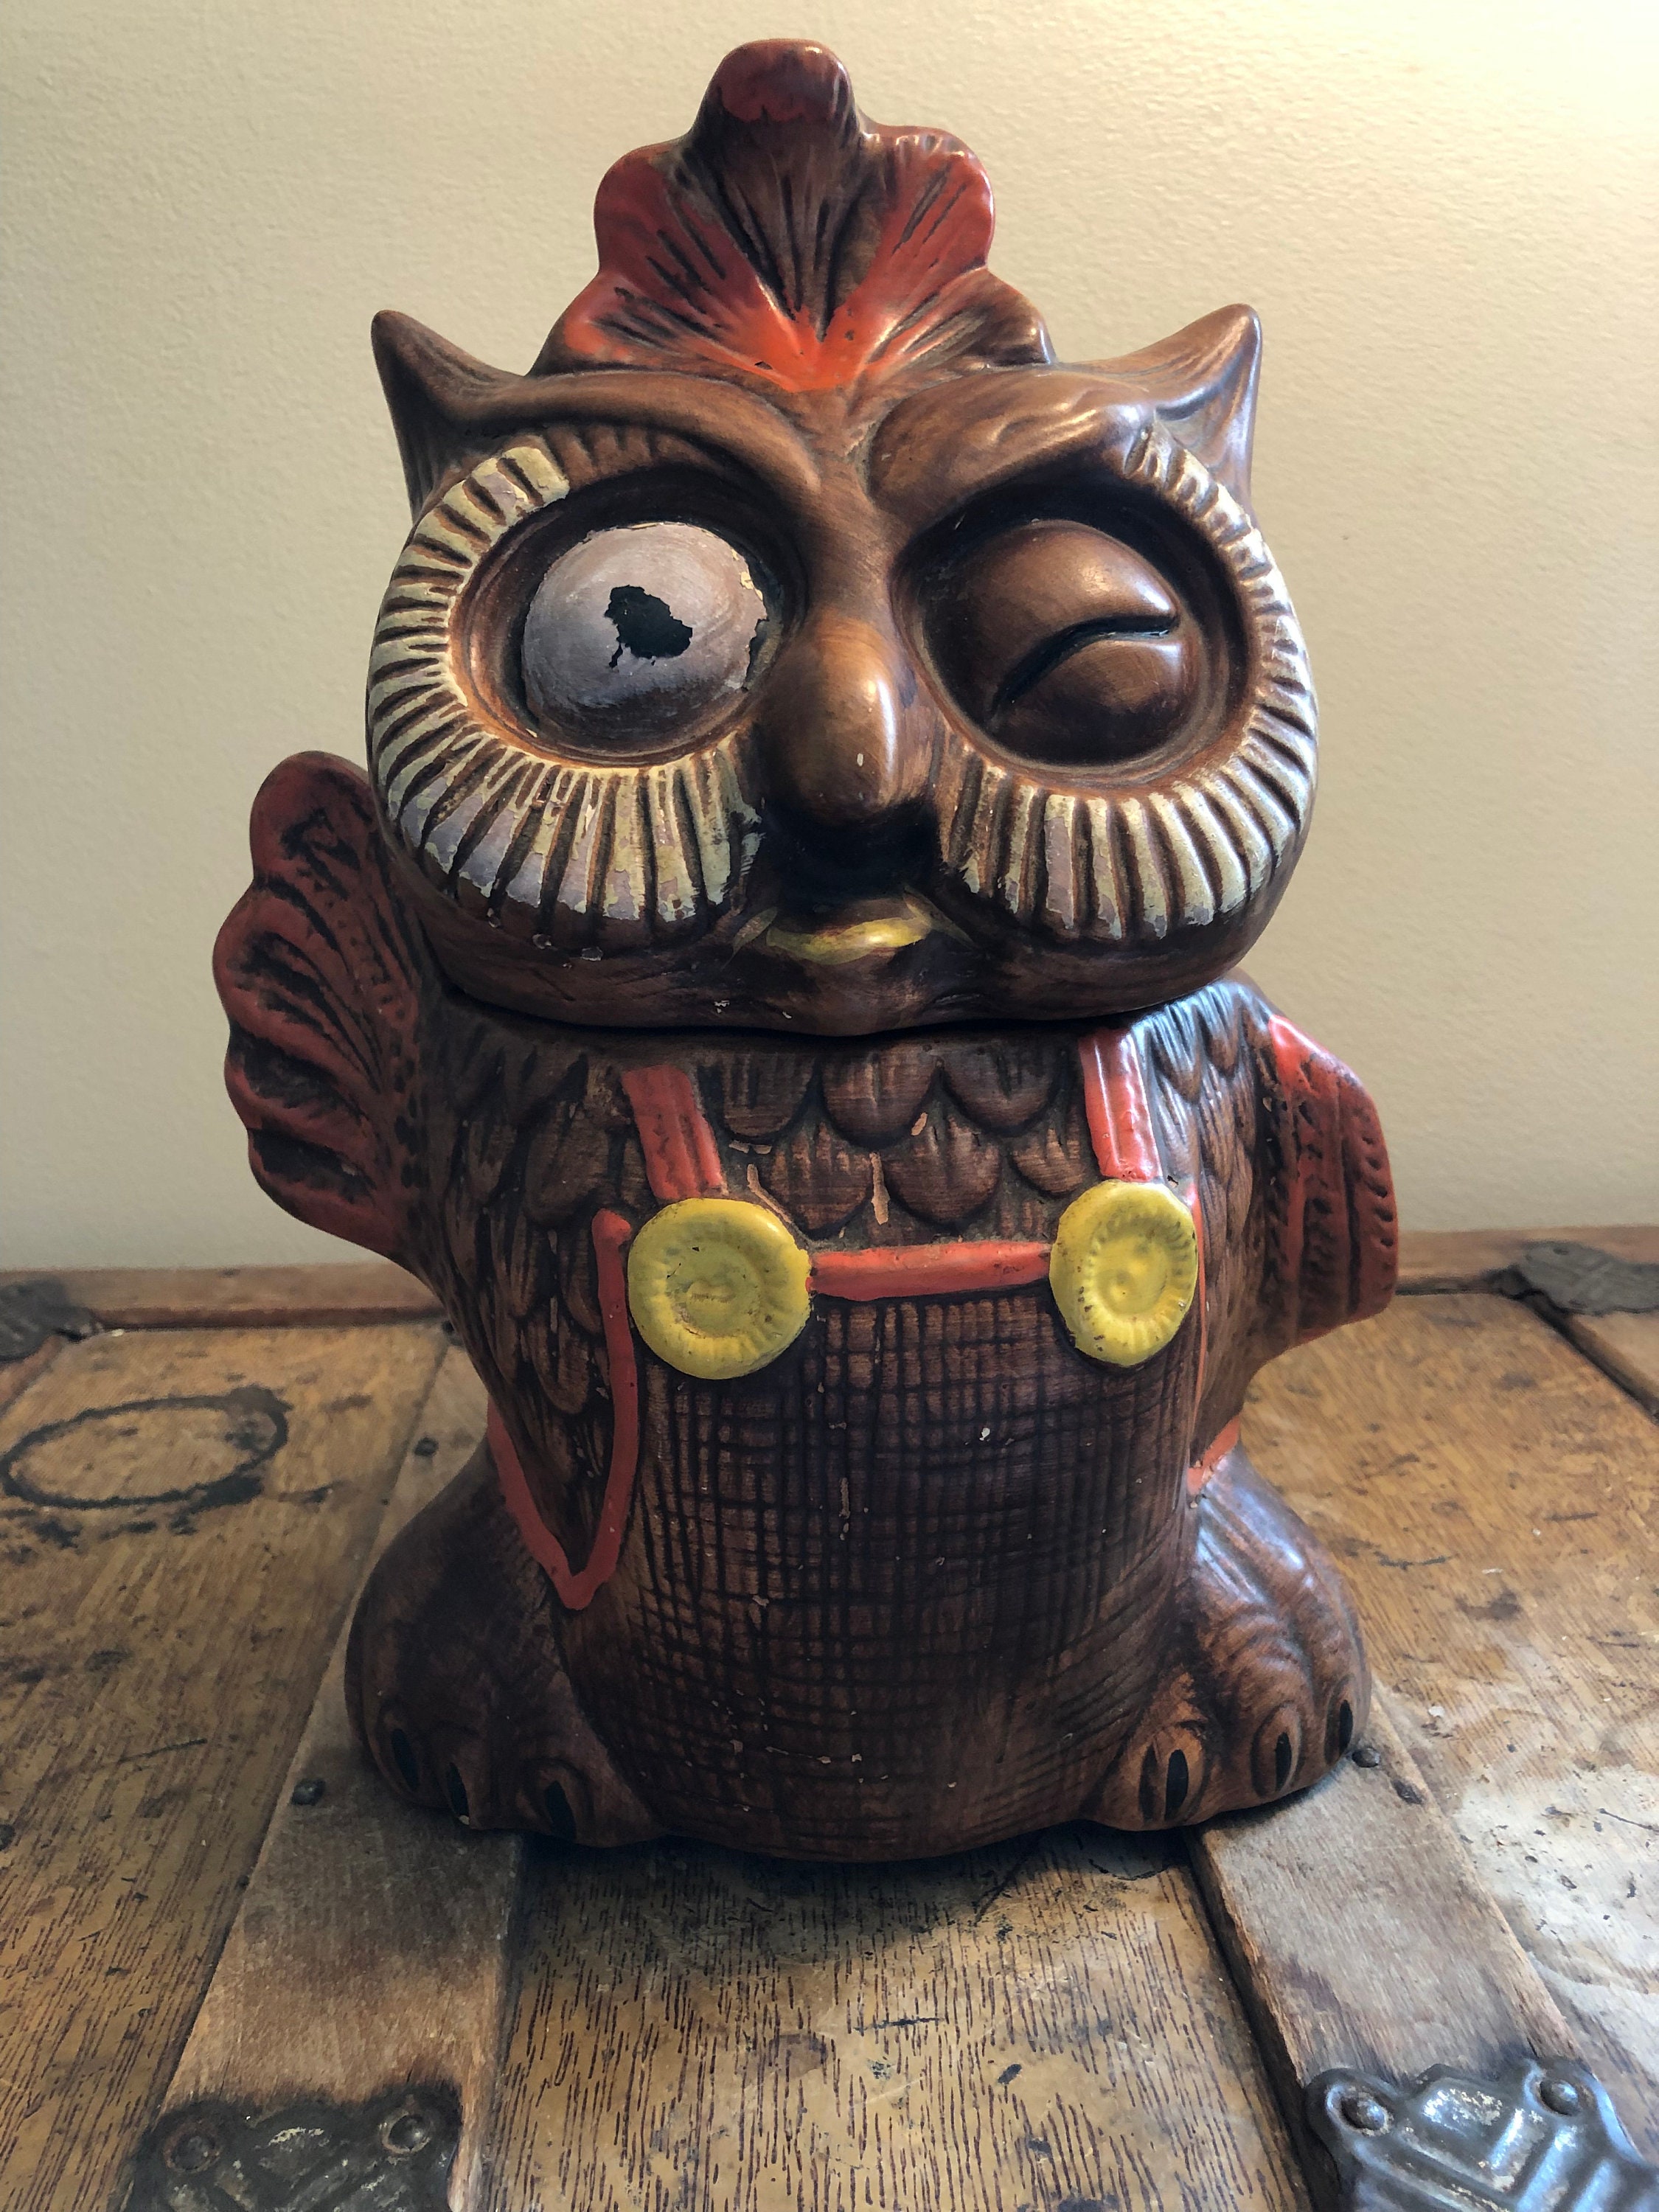 Buy Vintage Large Glass Owl Cookie Jar Canister Online in India 